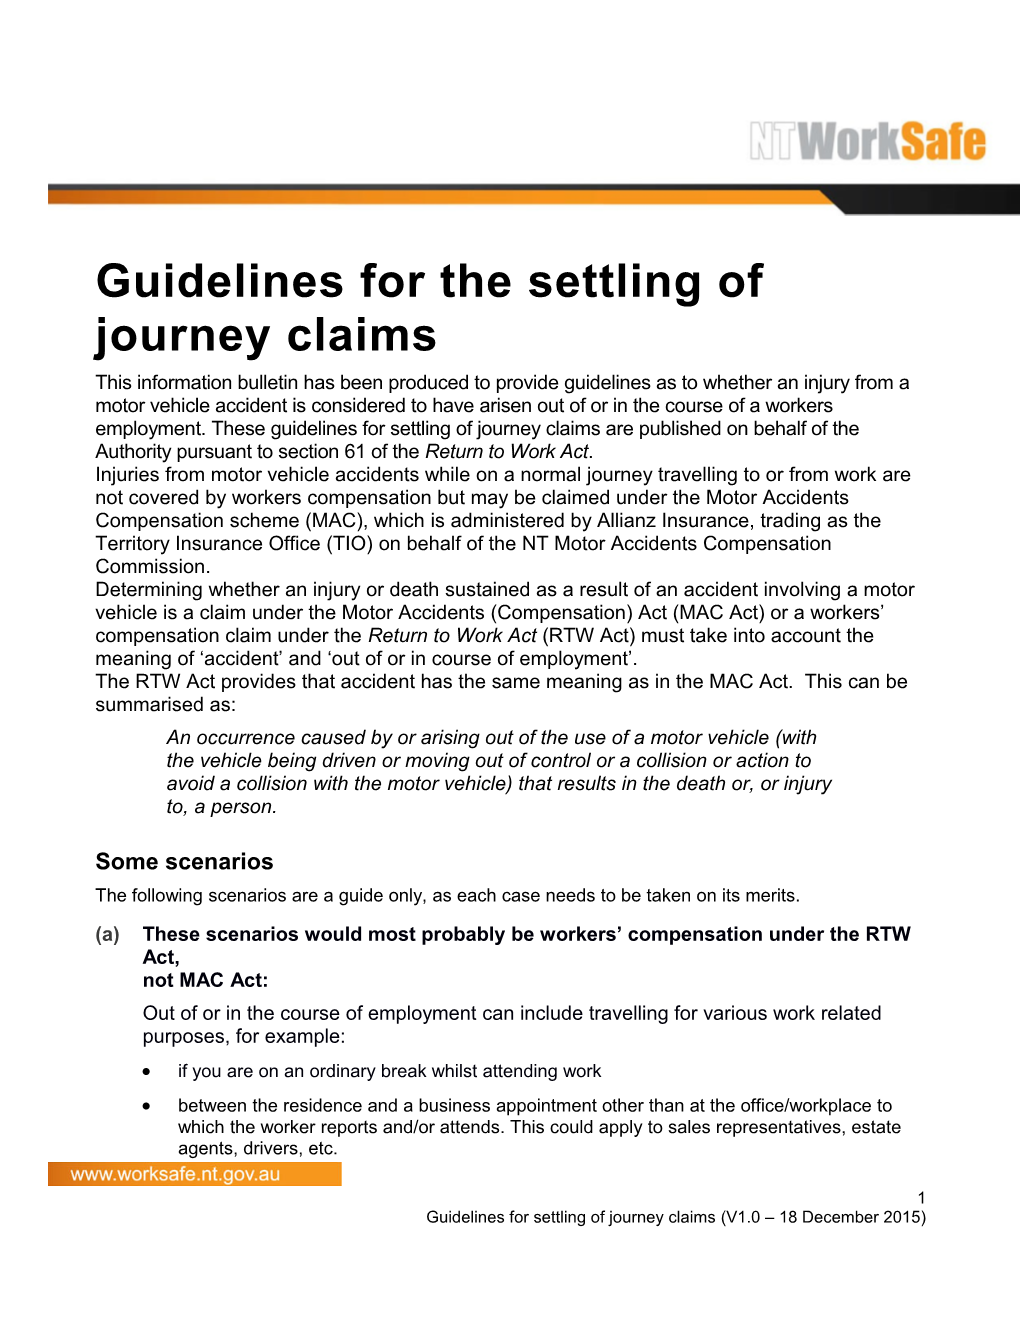 Guidelines for Settling of Journey Claims